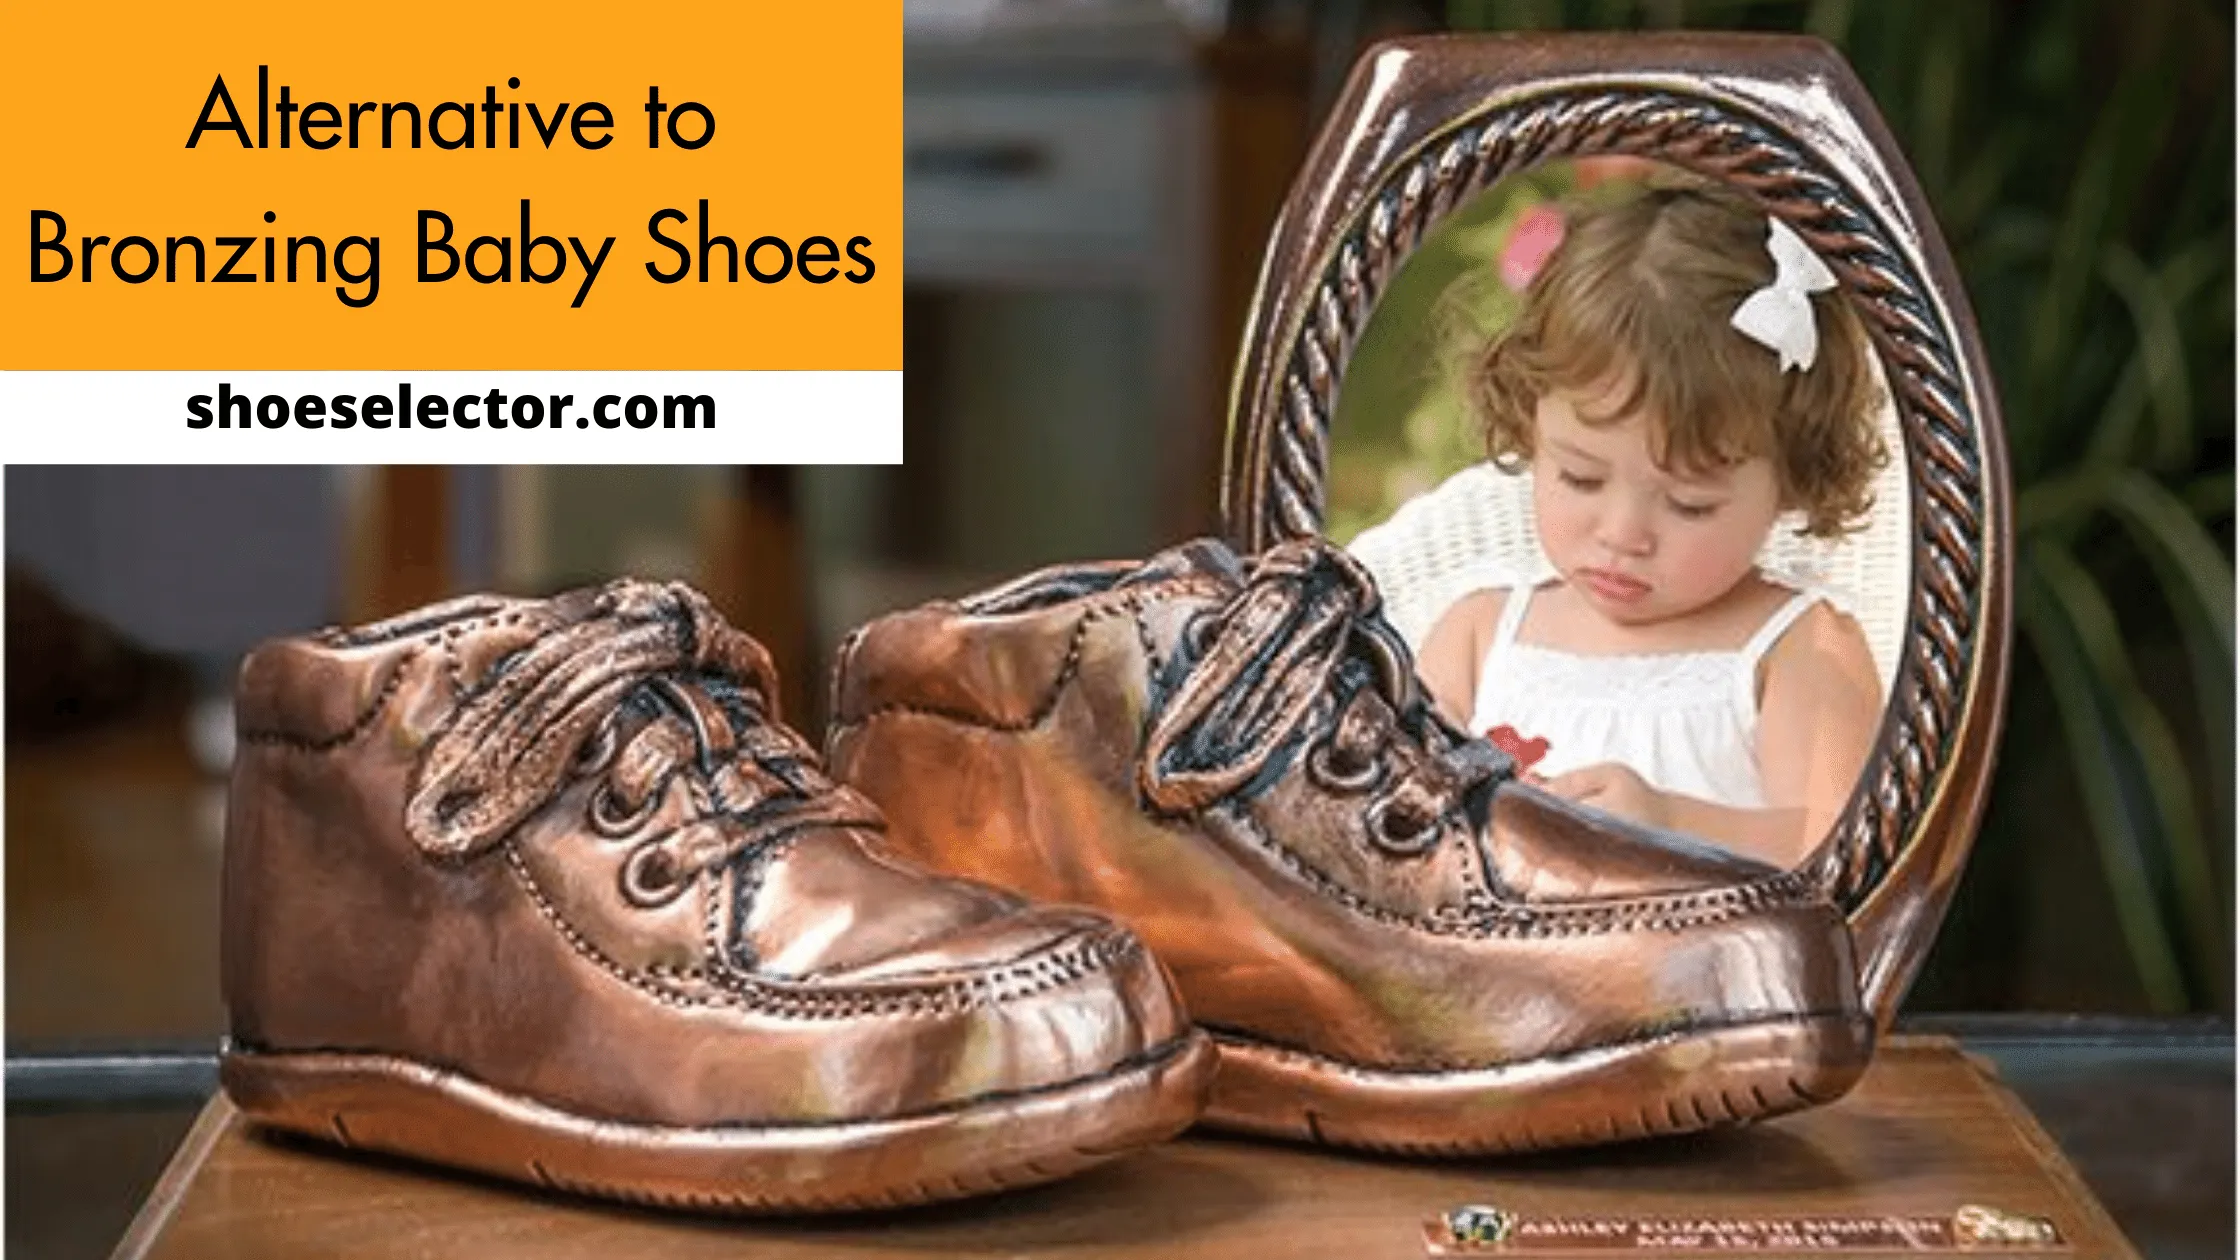 Alternative to Bronzing Baby Shoes - Comprehensive Guide